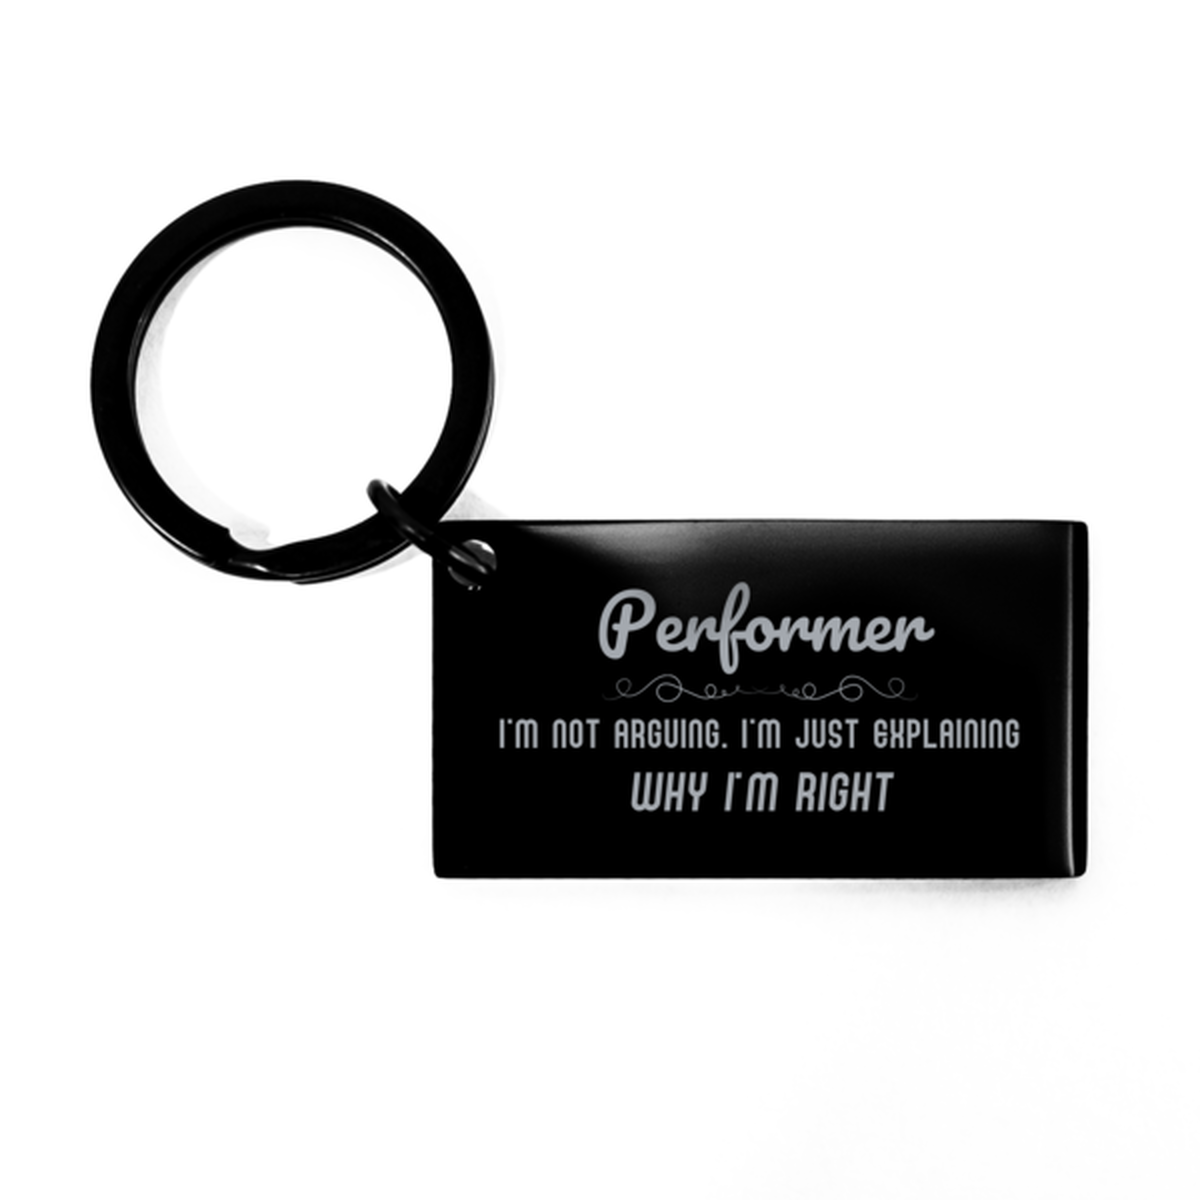 Performer I'm not Arguing. I'm Just Explaining Why I'm RIGHT Keychain, Funny Saying Quote Performer Gifts For Performer Graduation Birthday Christmas Gifts for Men Women Coworker